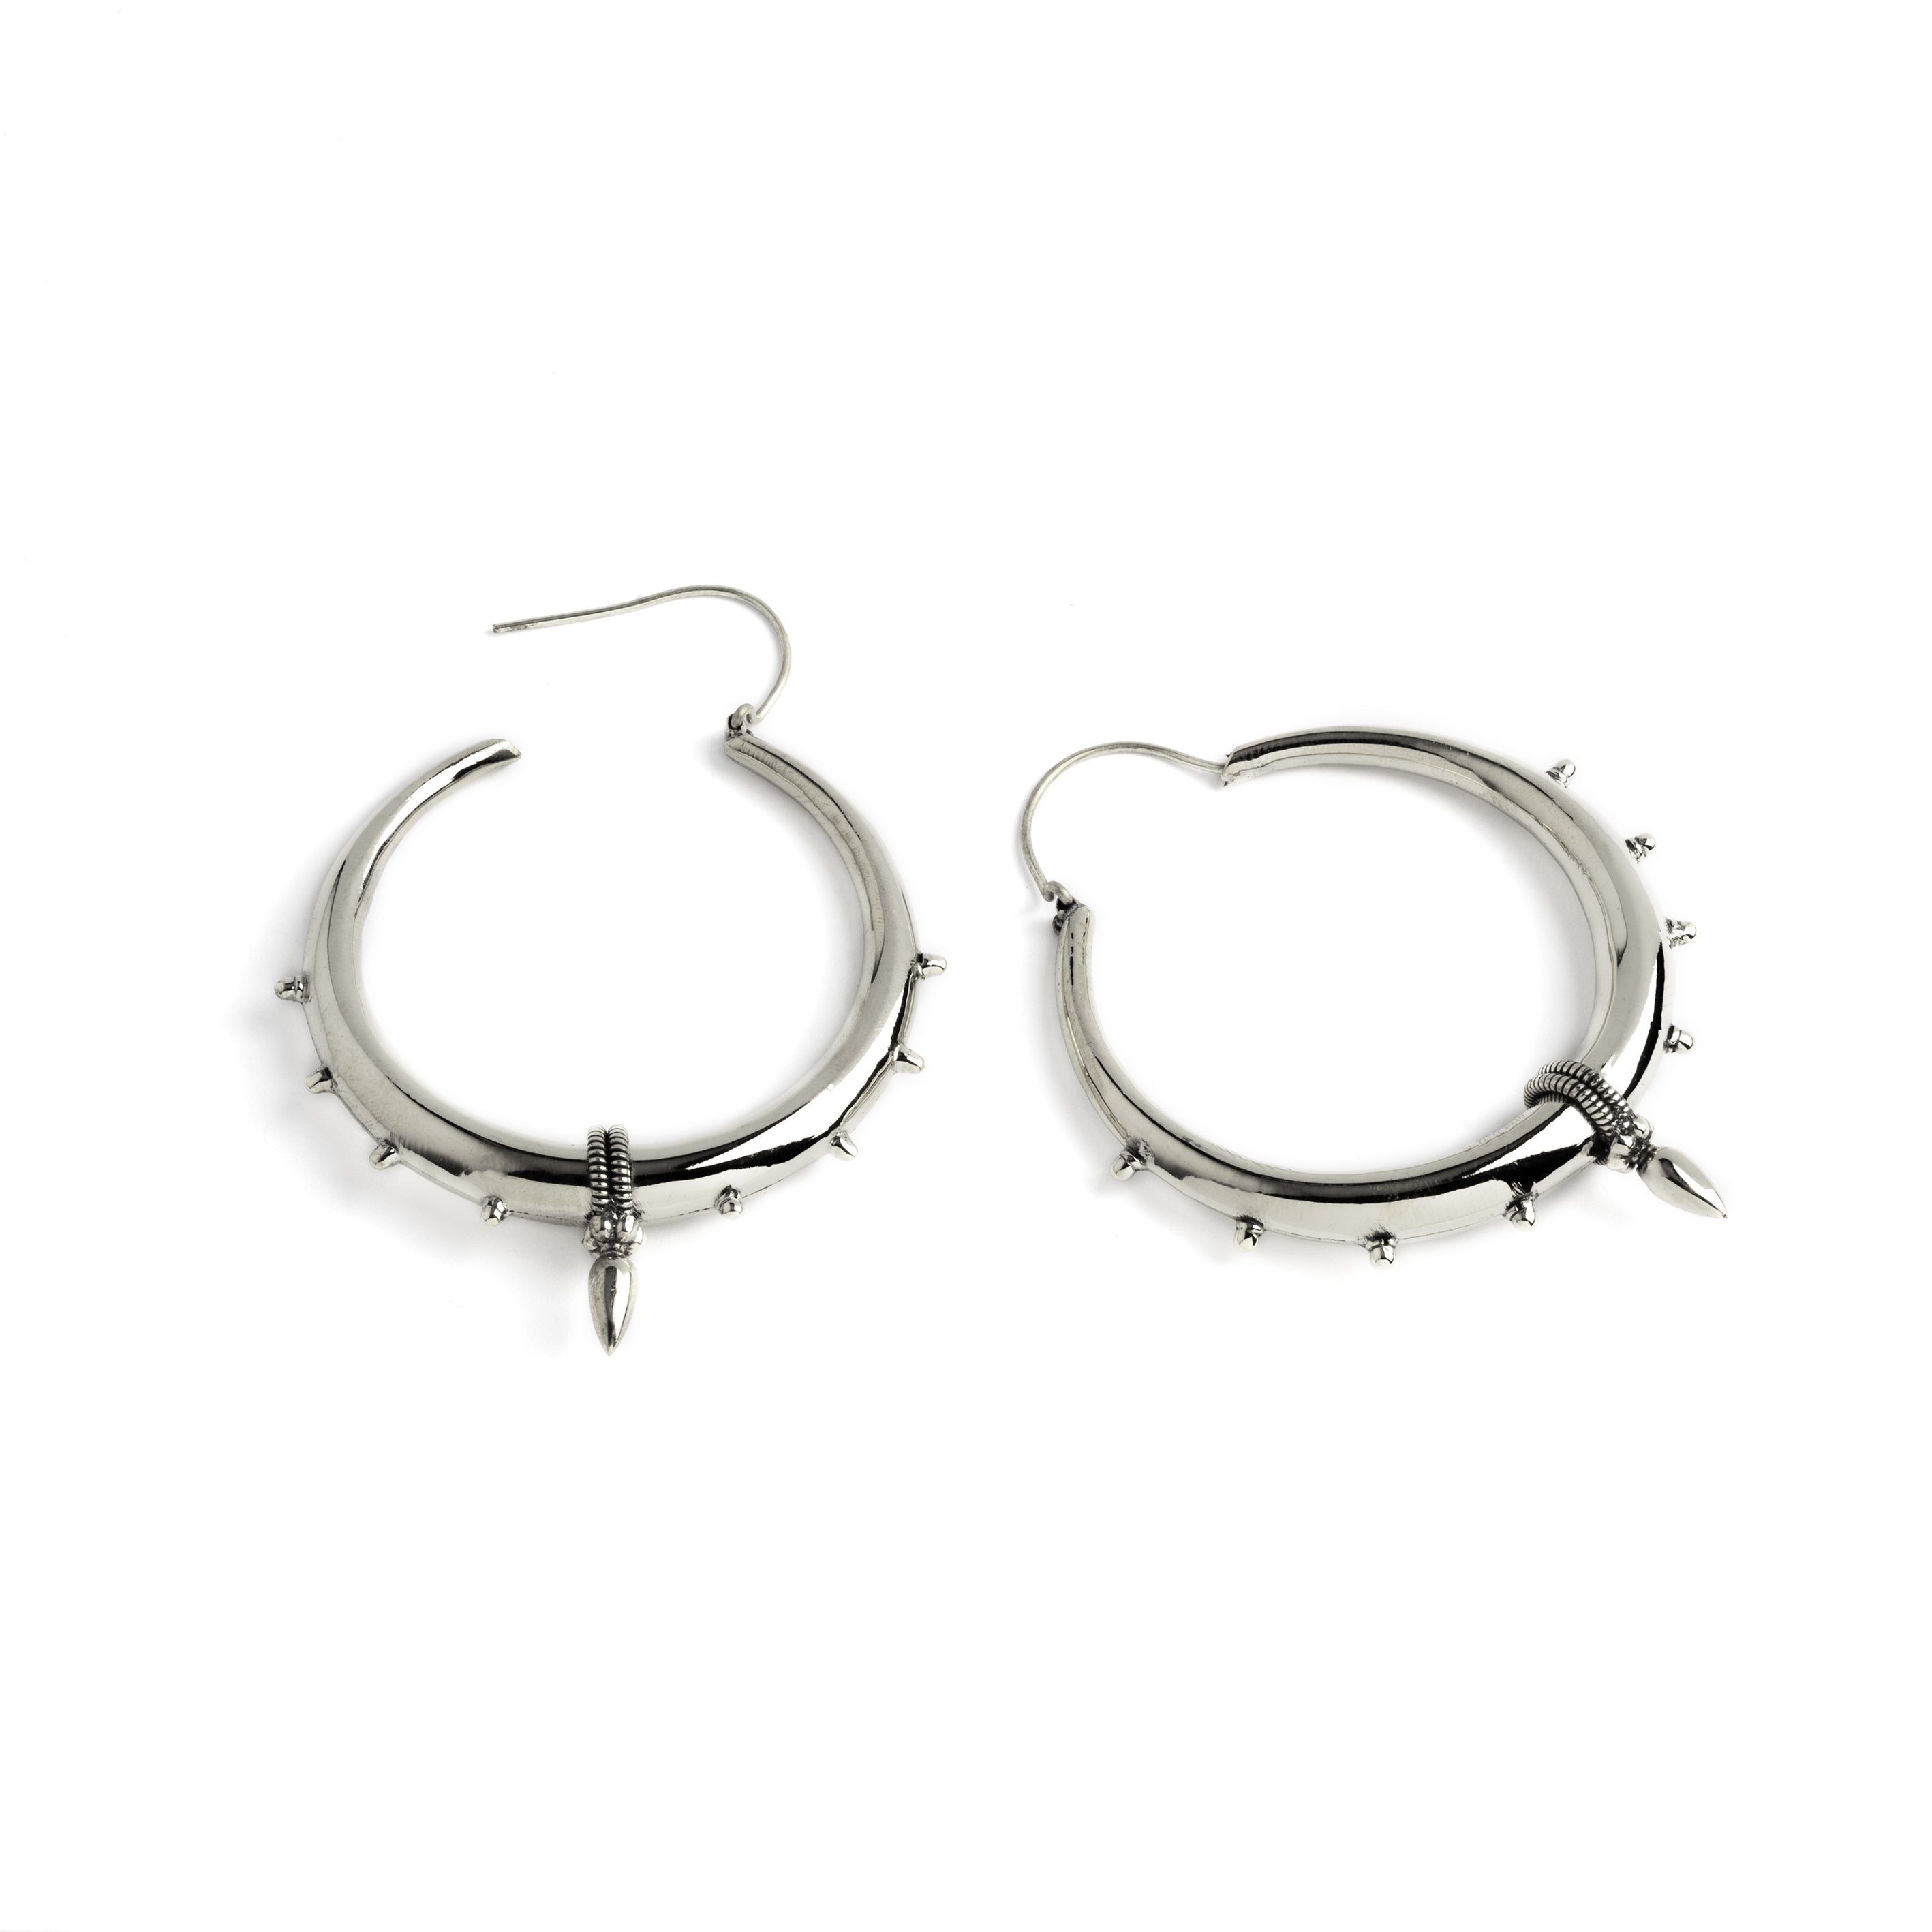 Silver Warrior Earrings with open clasp